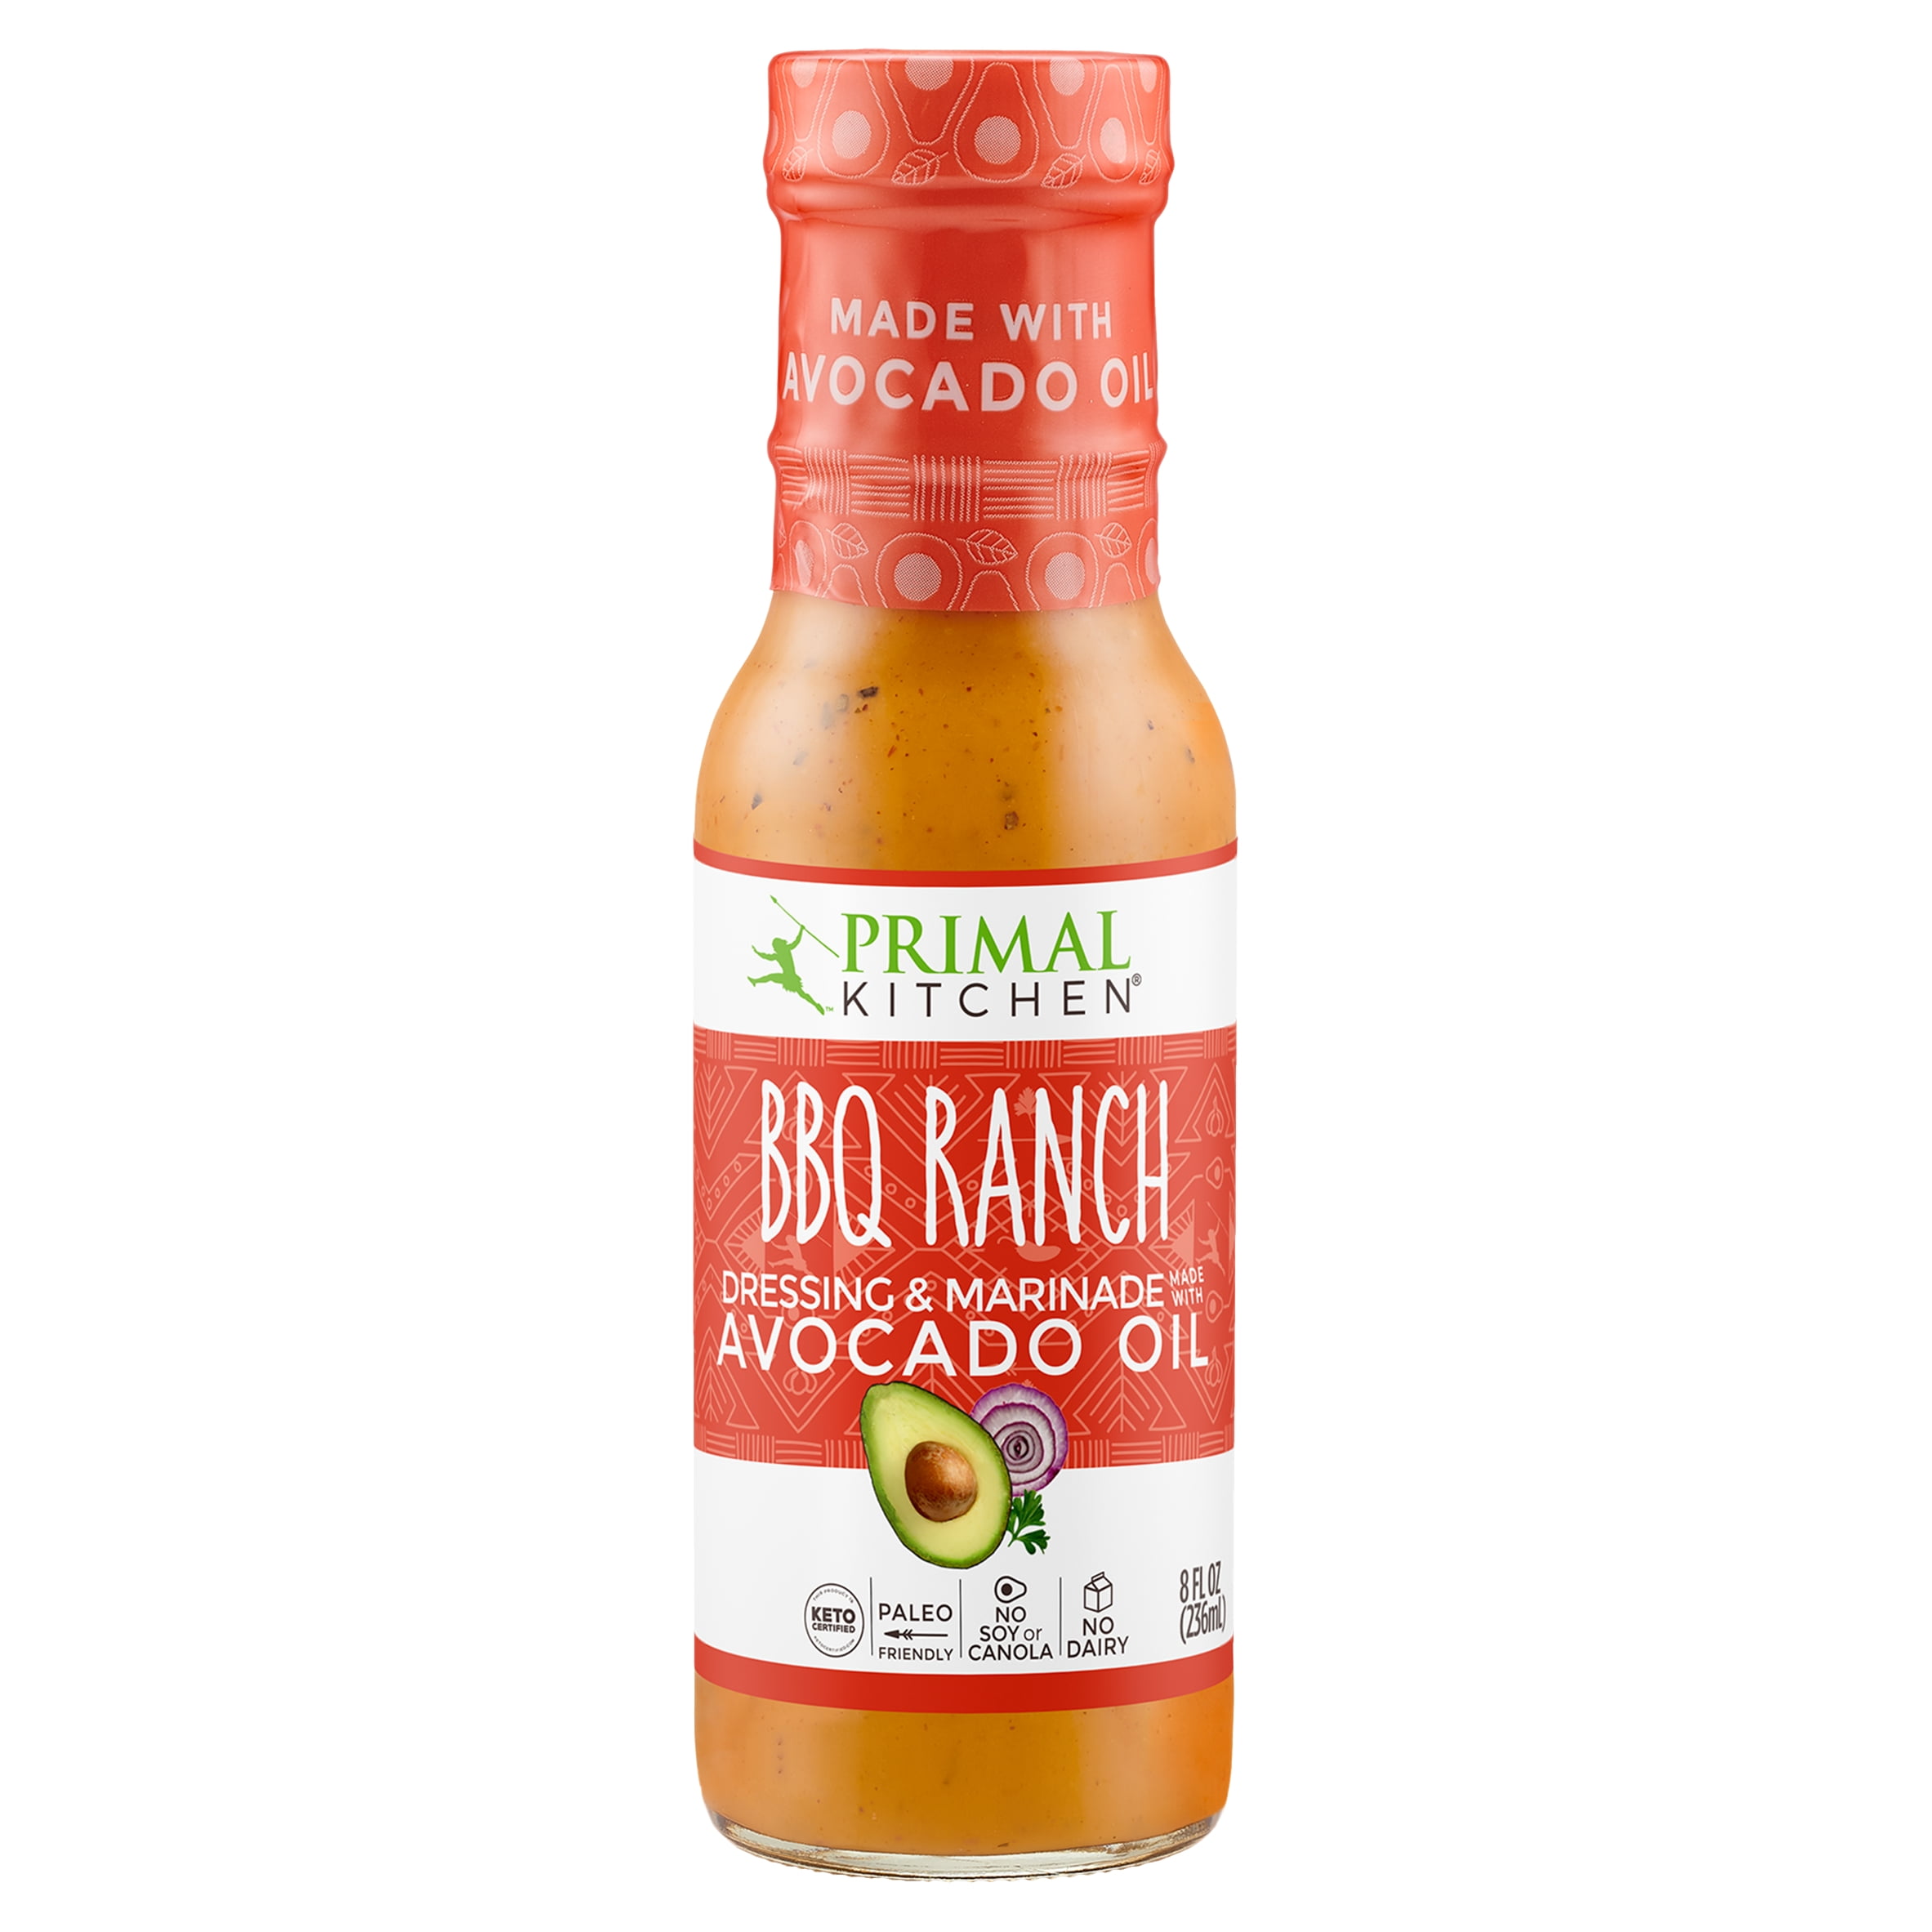 Primal Kitchen BBQ Ranch boo-boo? - Can I have ___? - Whole30